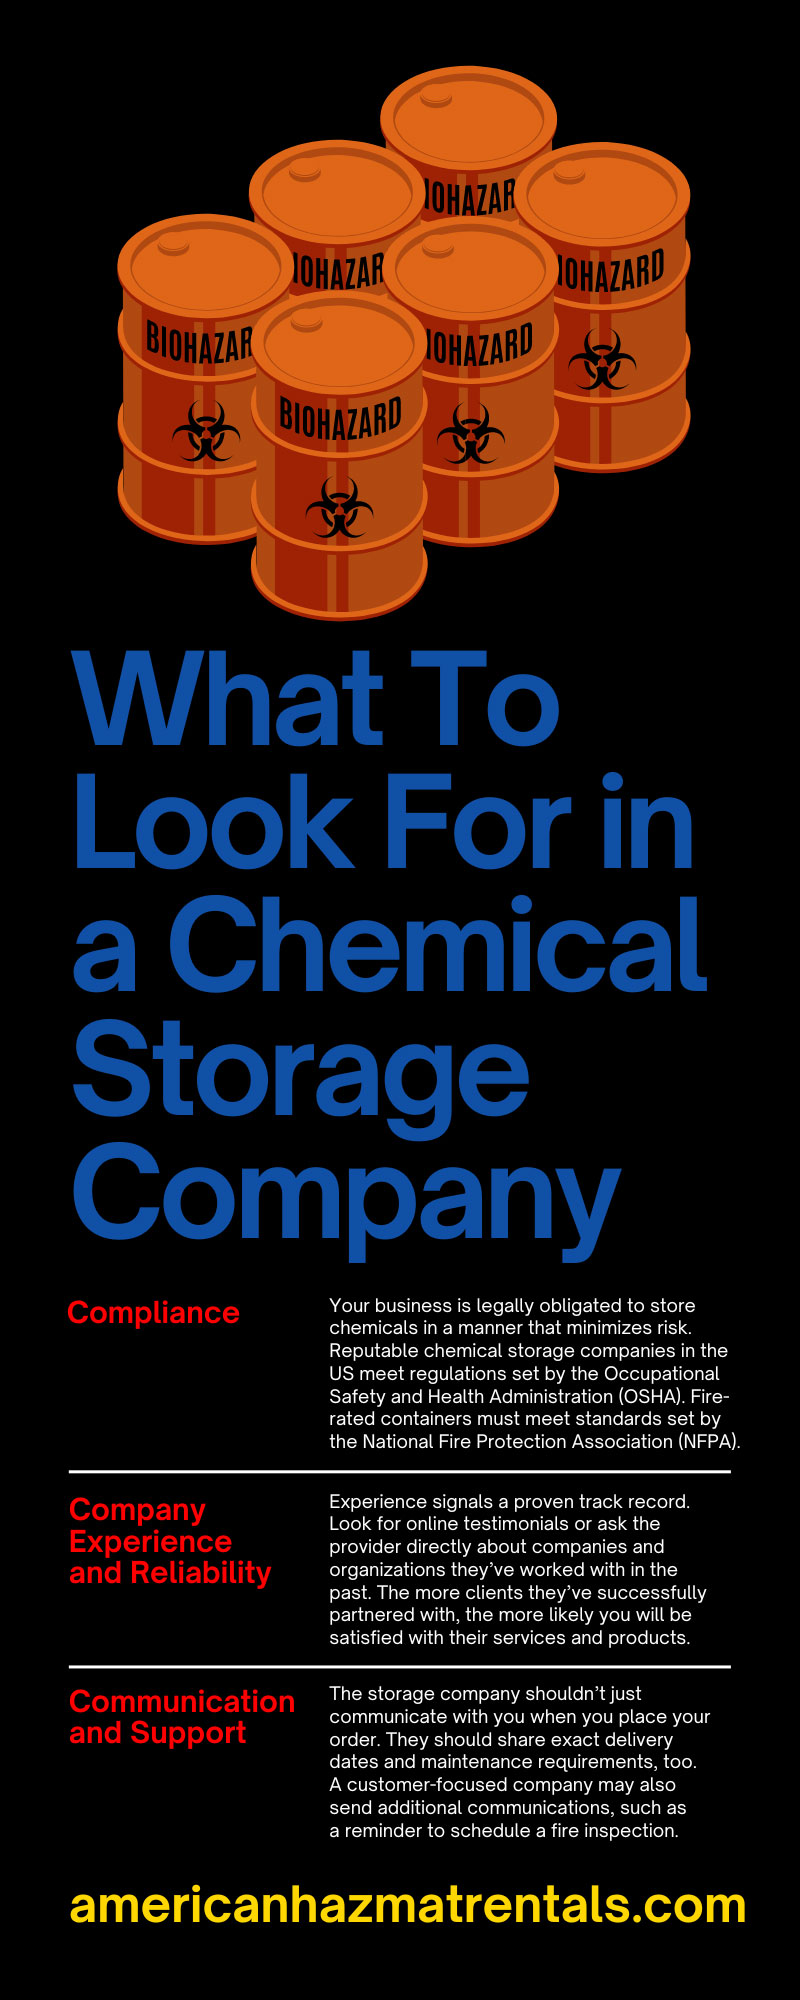 What To Look For in a Chemical Storage Company
